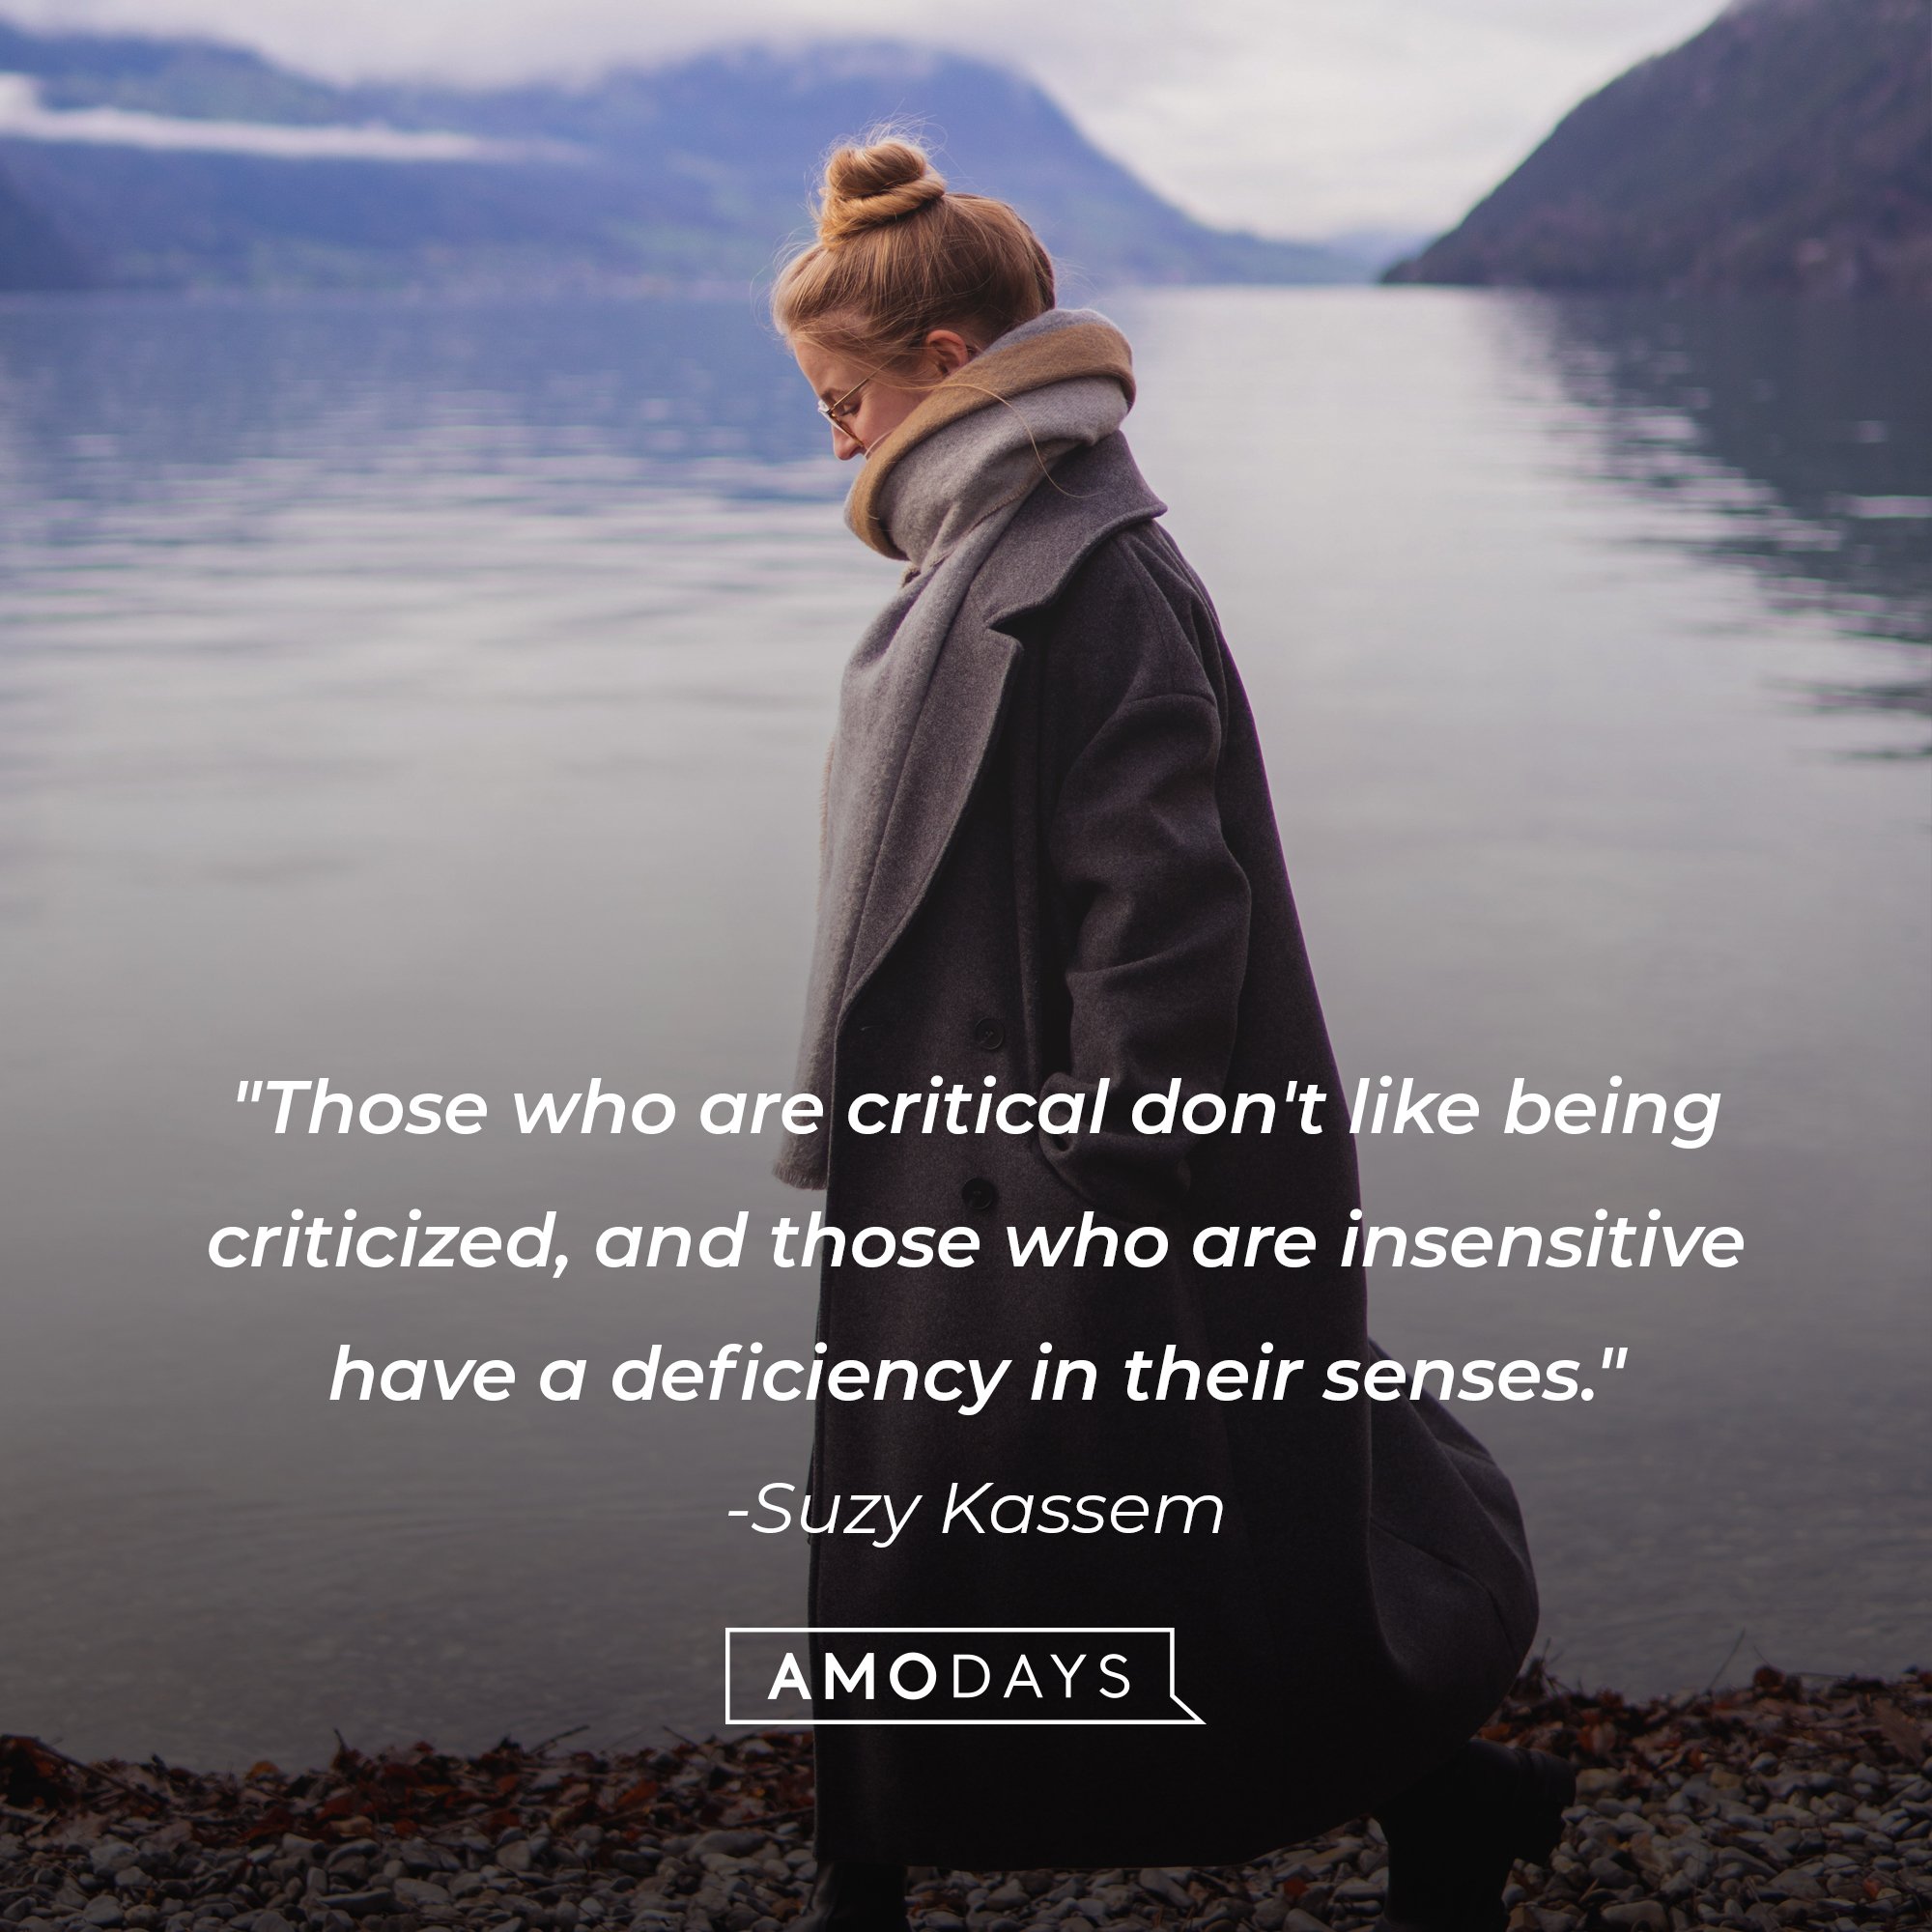 Suzy Kassem’s quote: "Those who are critical don't like being criticized, and those who are insensitive have a deficiency in their senses." | Image: AmoDays 